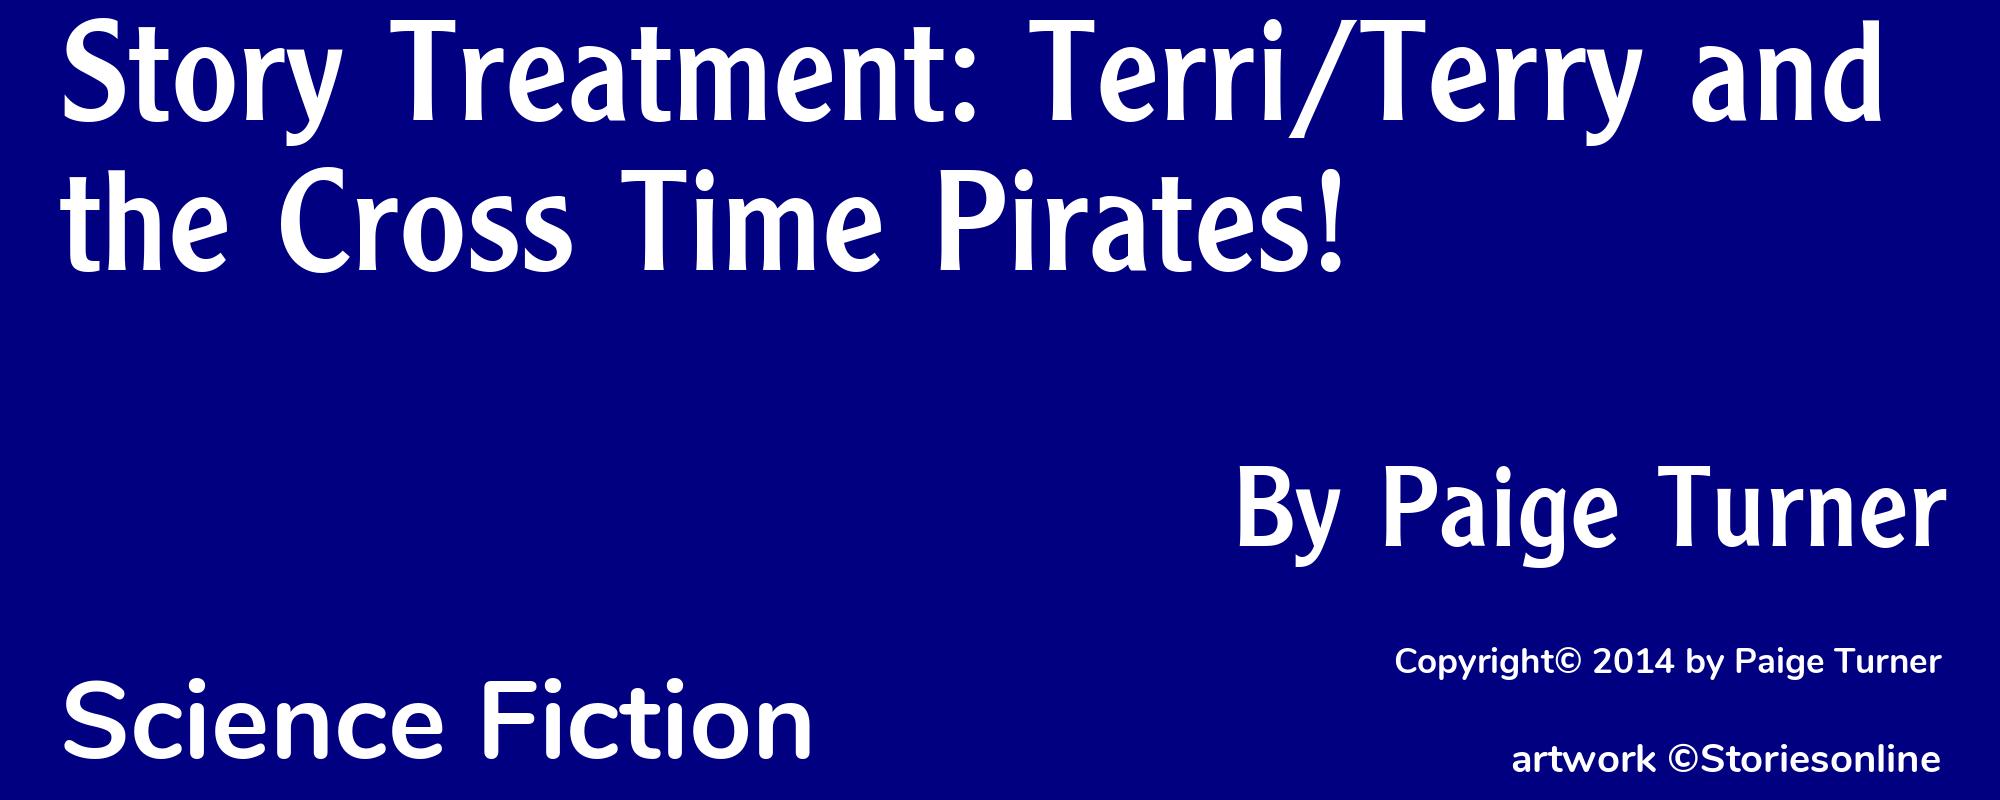 Story Treatment: Terri/Terry and the Cross Time Pirates! - Cover